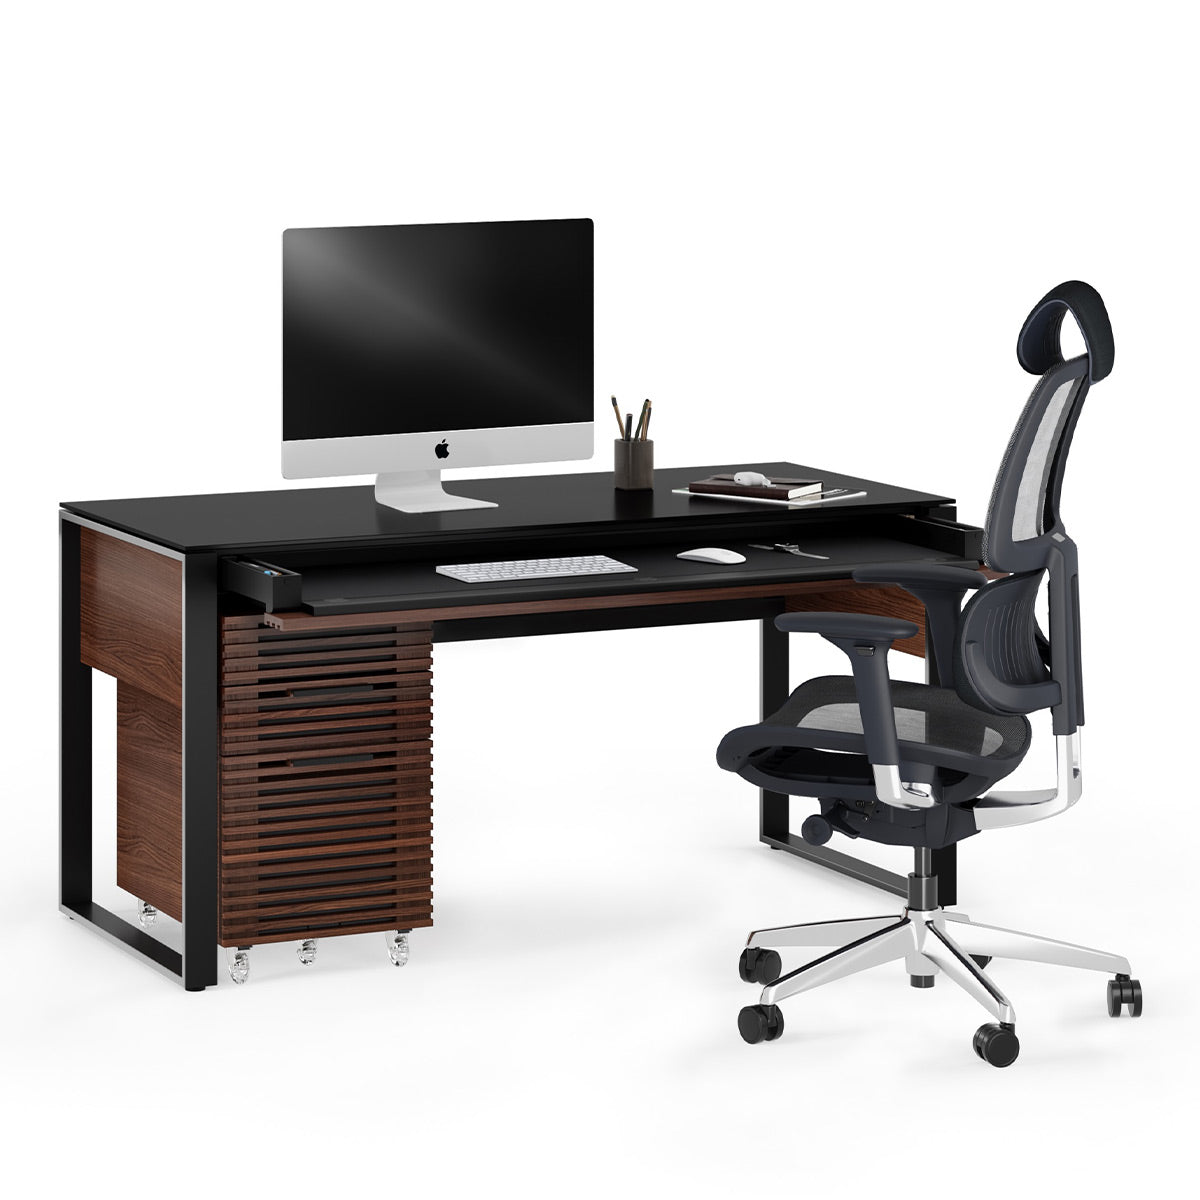 BDI Corridor 6501 Desk with Keyboard Drawer (Chocolate Stained Walnut)